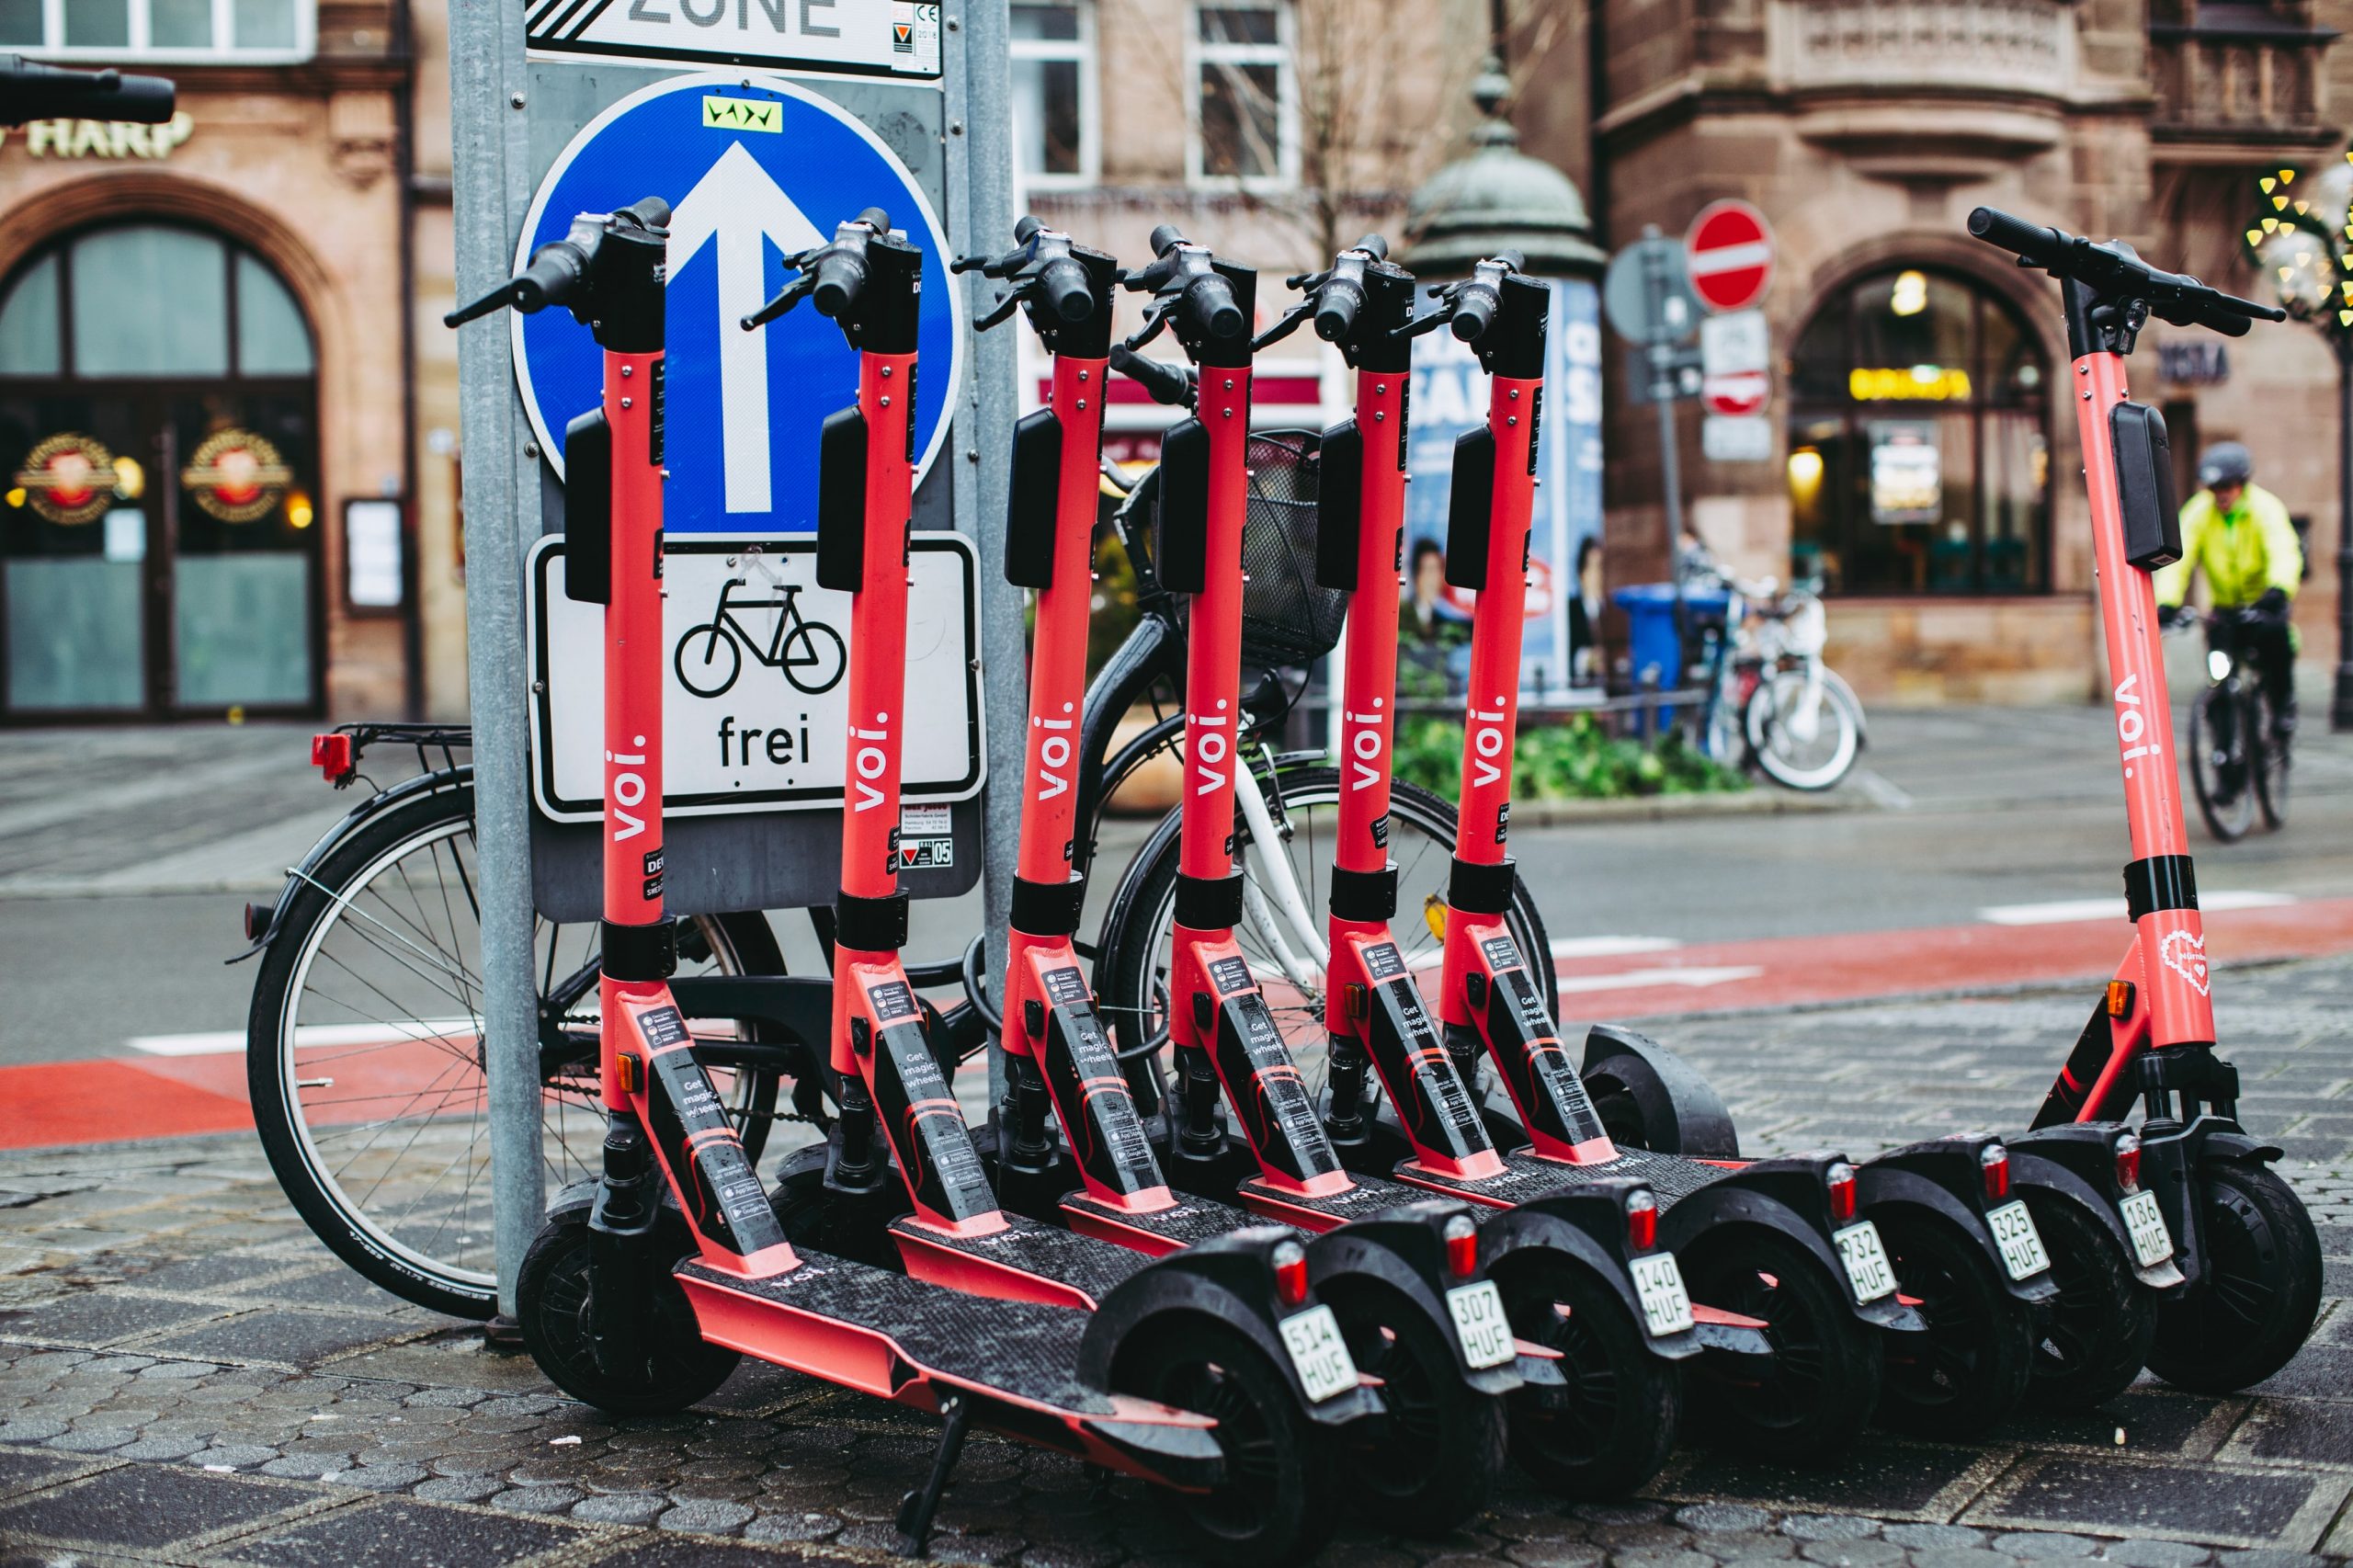 A row of e-scooters.